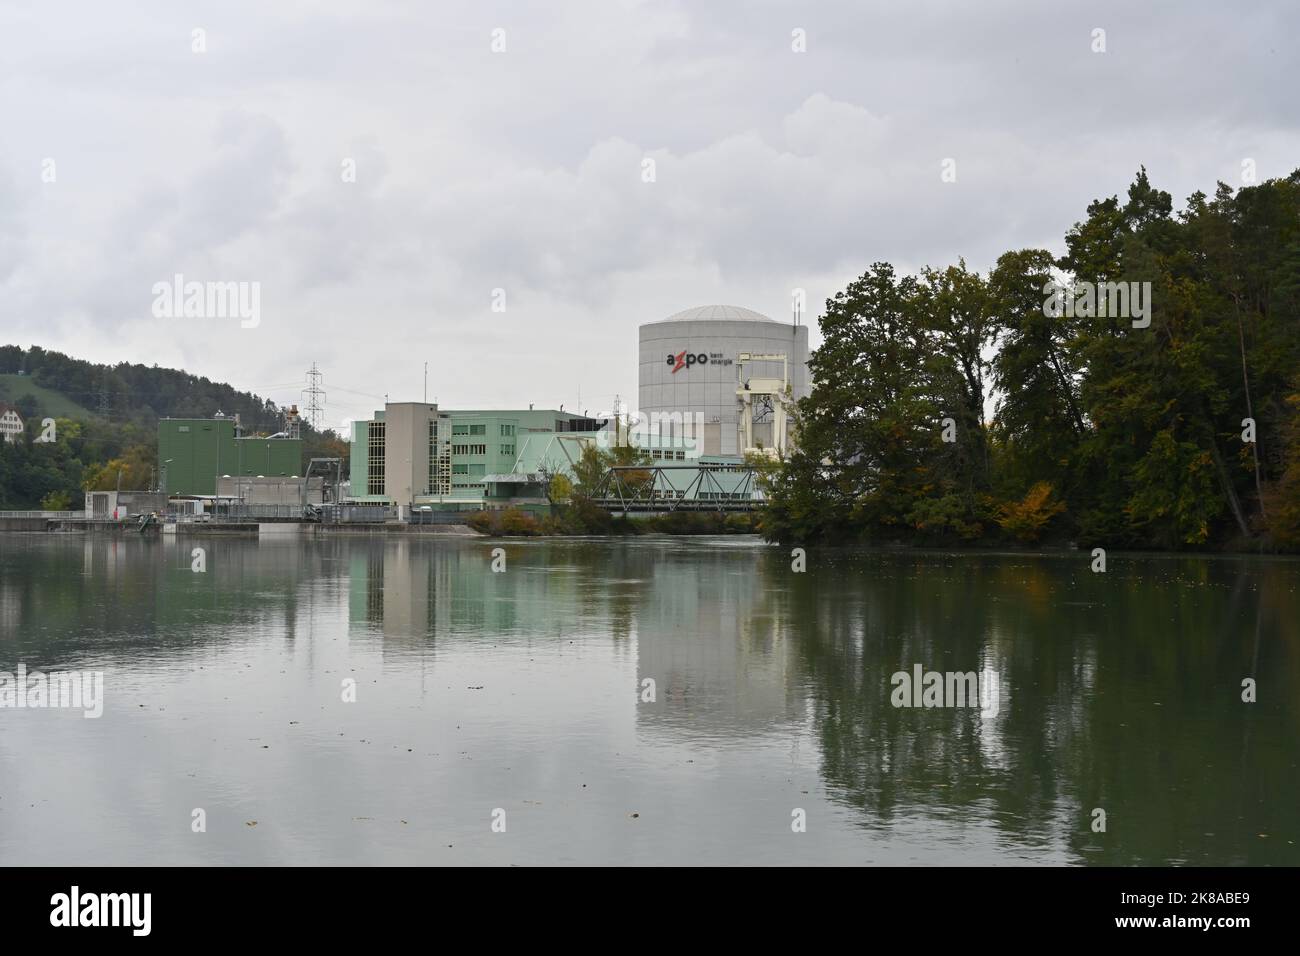 View on a nuclear power plant Beznau, owned by Axpo, from the bank of river Aare. Stock Photo